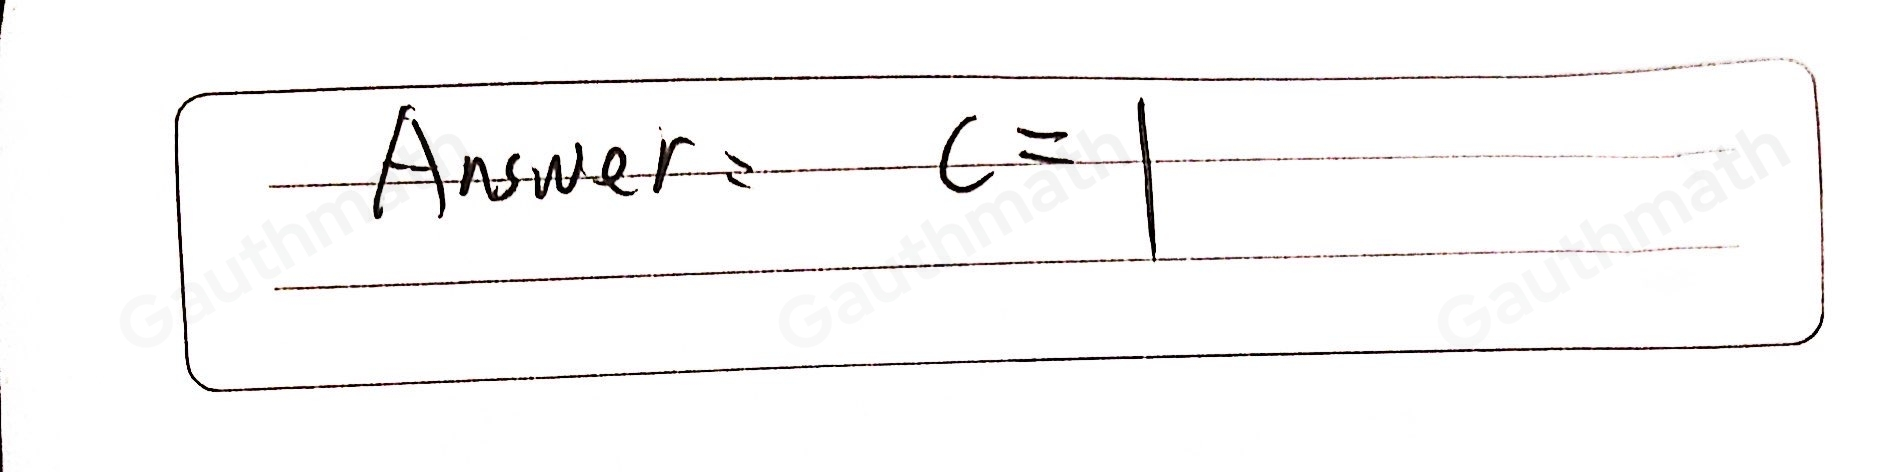 For what value of c is the relation a function? 2,8,12,3,c,4,-1,8,0,3 -1 1 2 12